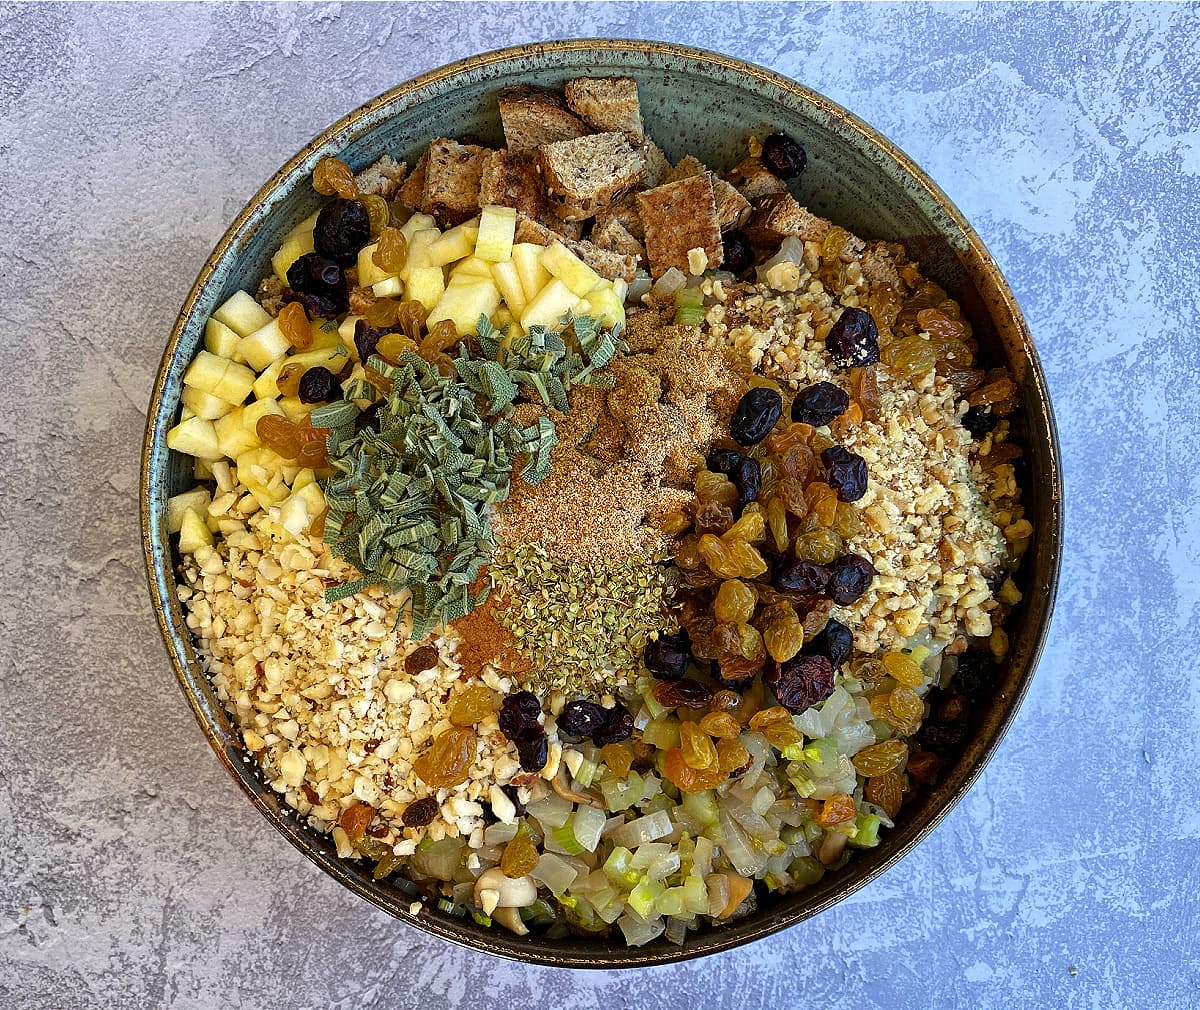 Dry stuffing ingredients in a large pottery bowl.